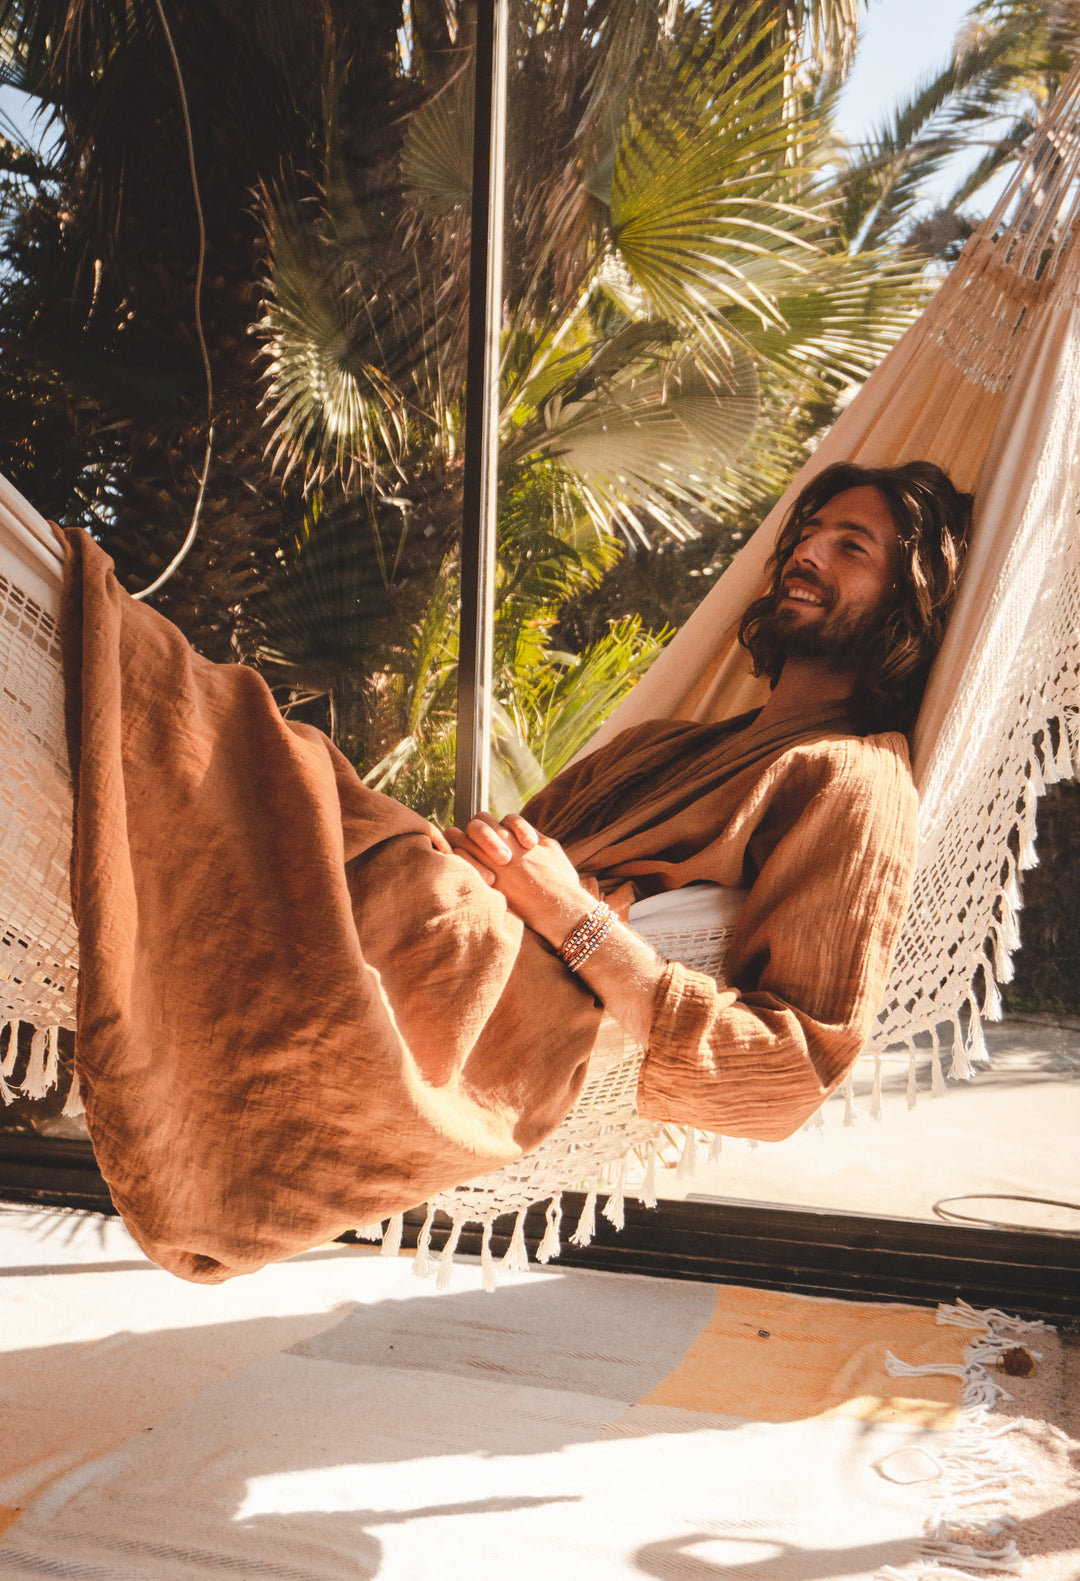 Man lounges in brown robe while relaxing in hammock.